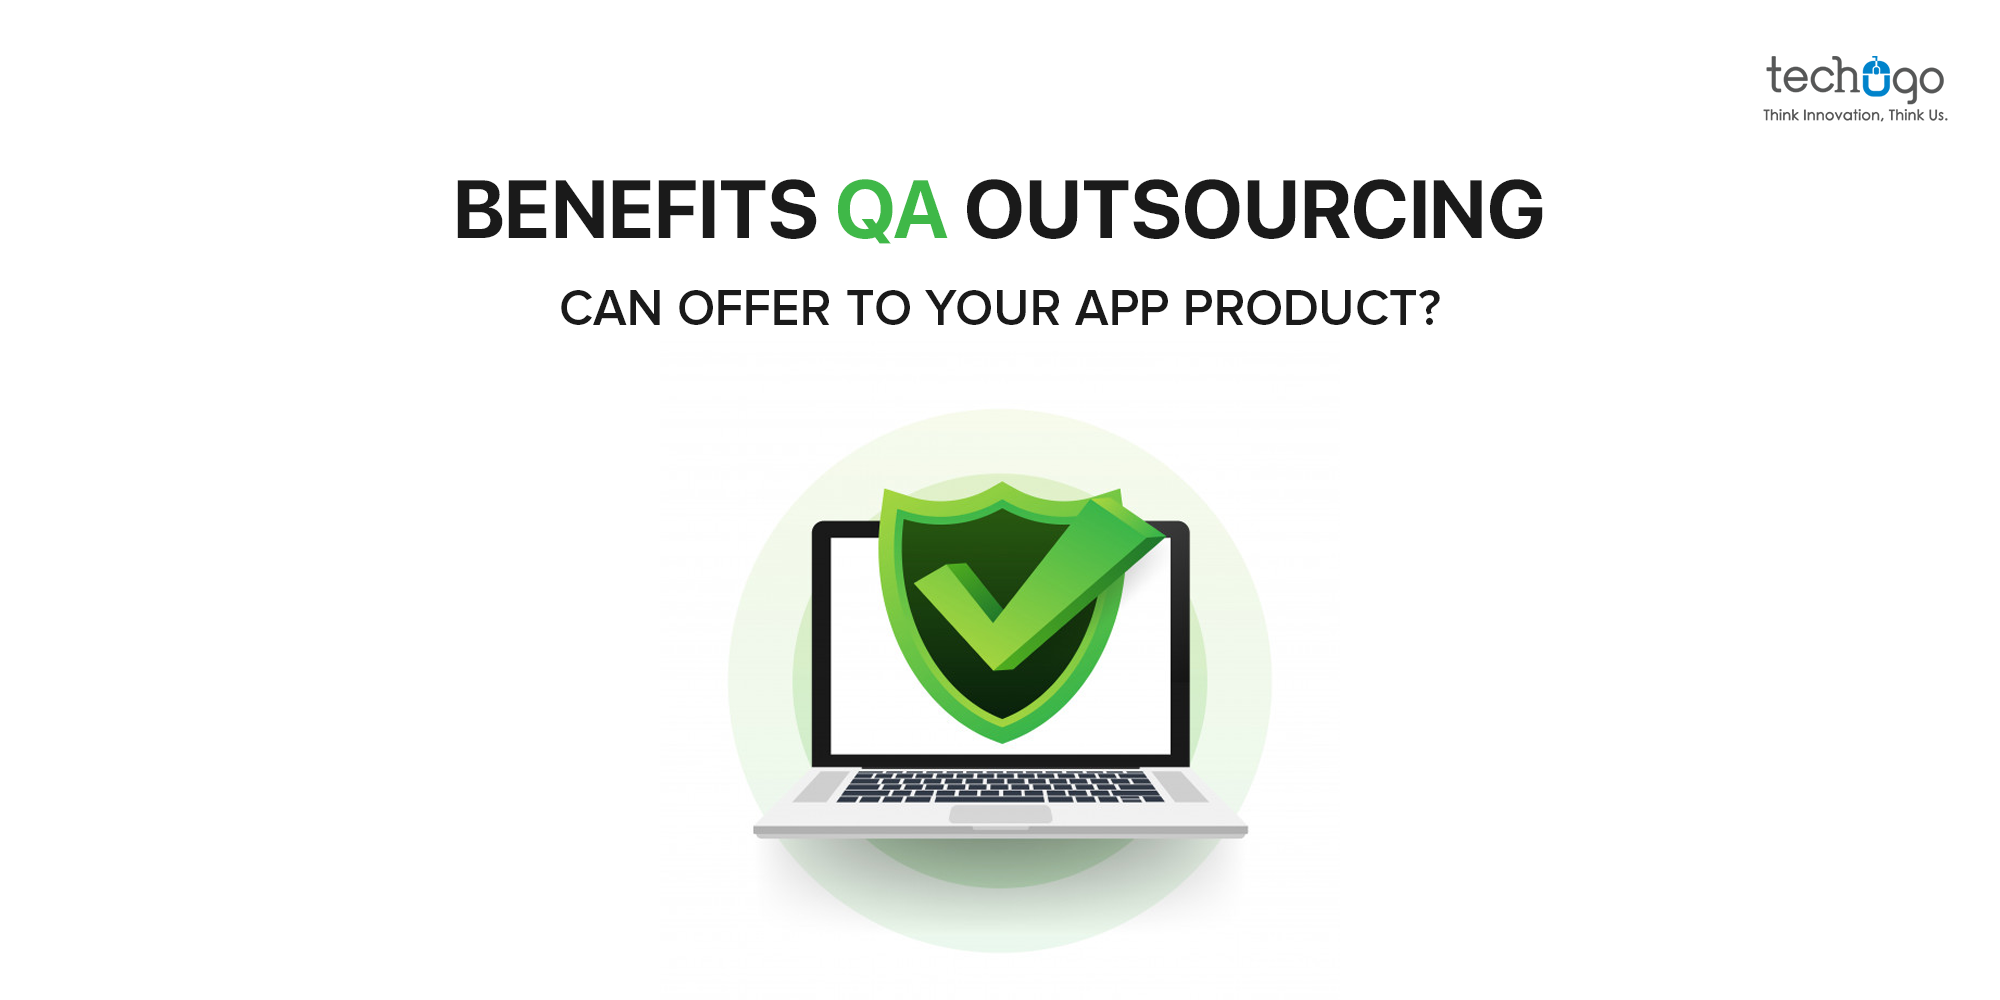 Benefits QA Outsourcing Can Offer To Your App Product?